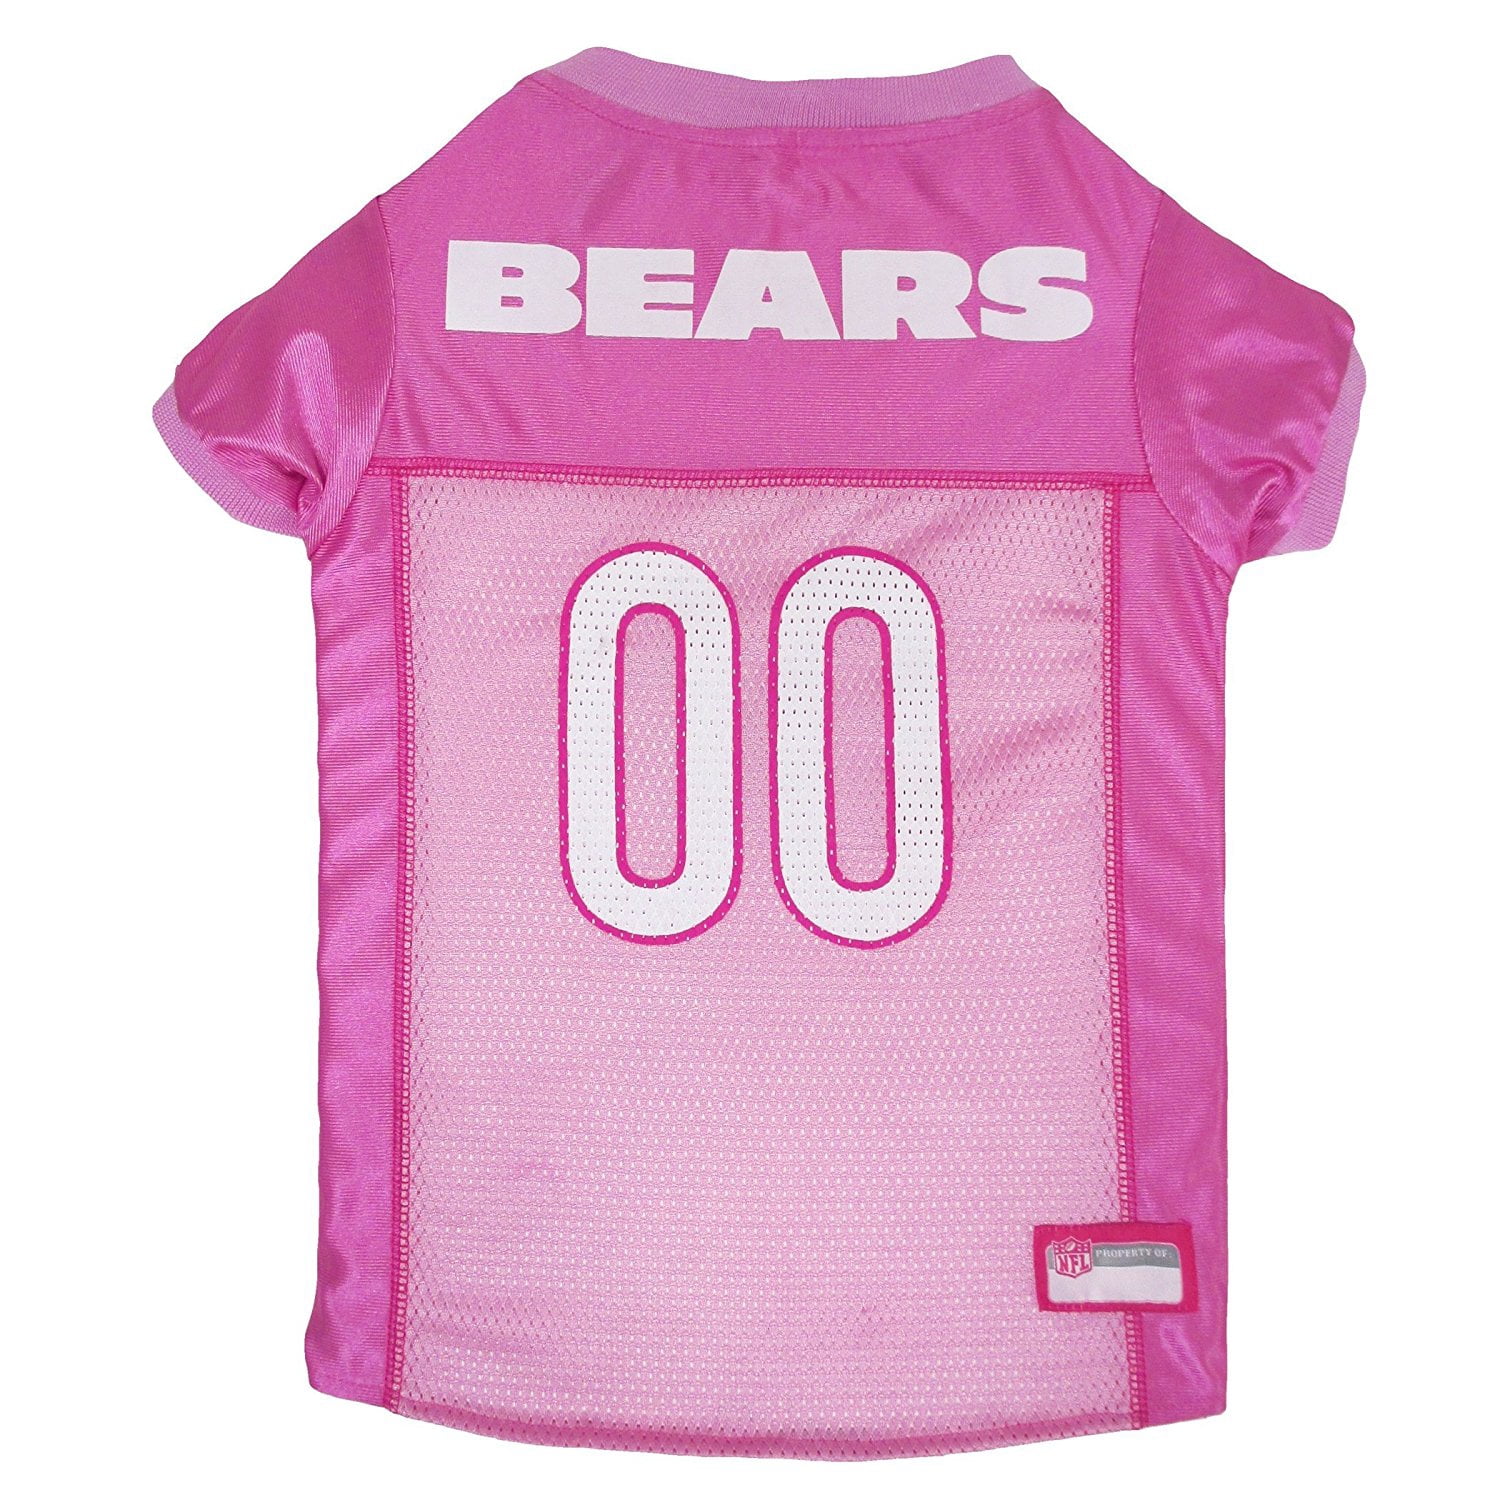 nfl football jersey for dogs